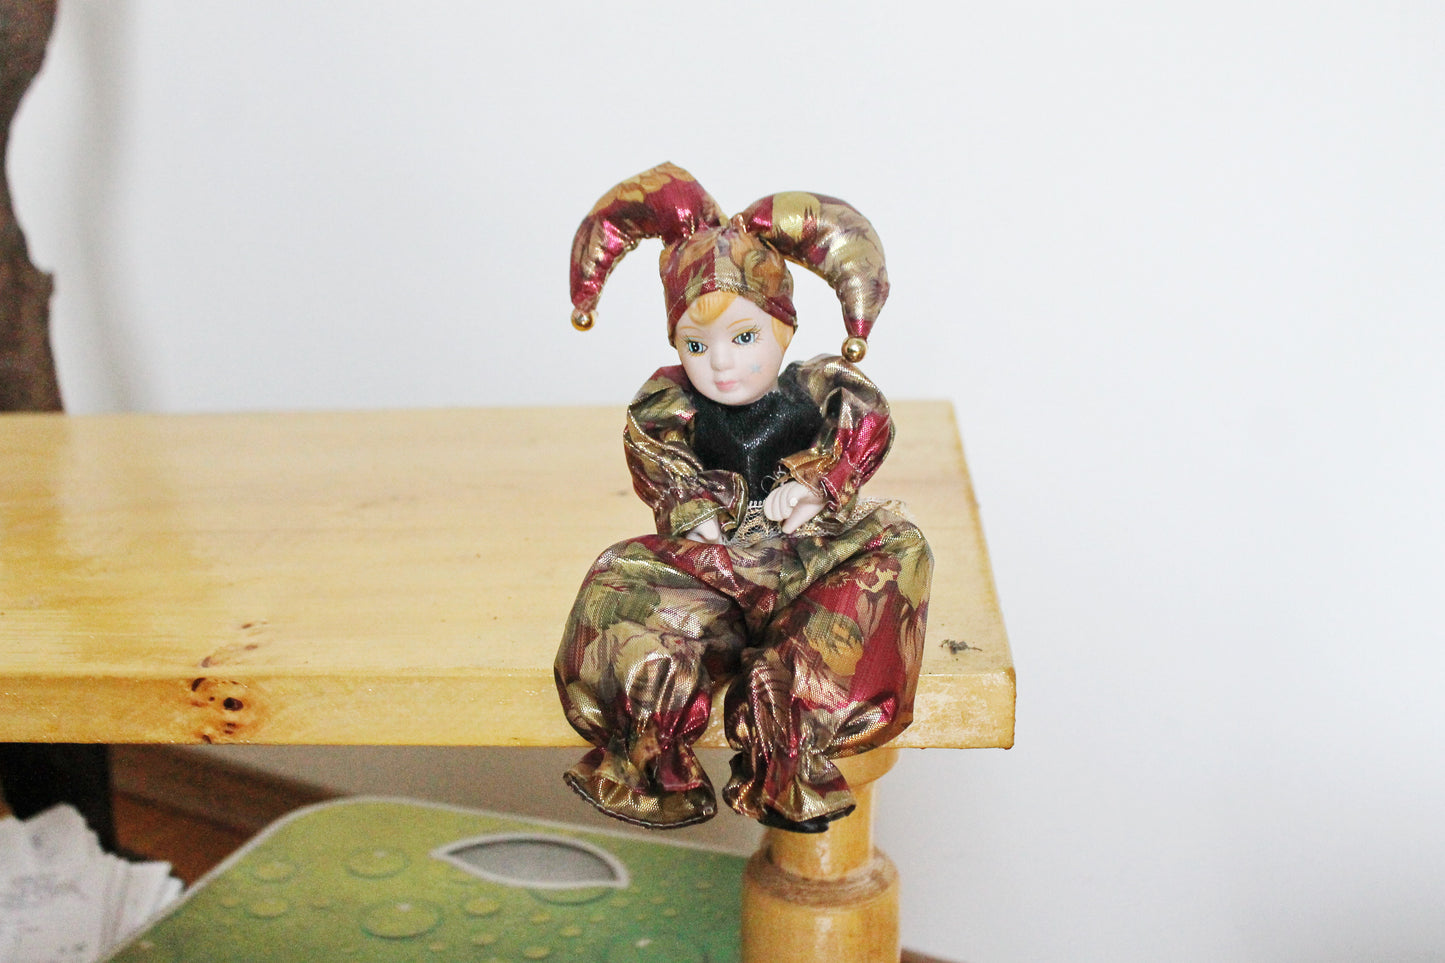 Vintage porcelain Venetian small doll - Harlequin - 9 inches- collectible doll - porcelain doll - decor doll - 1980s